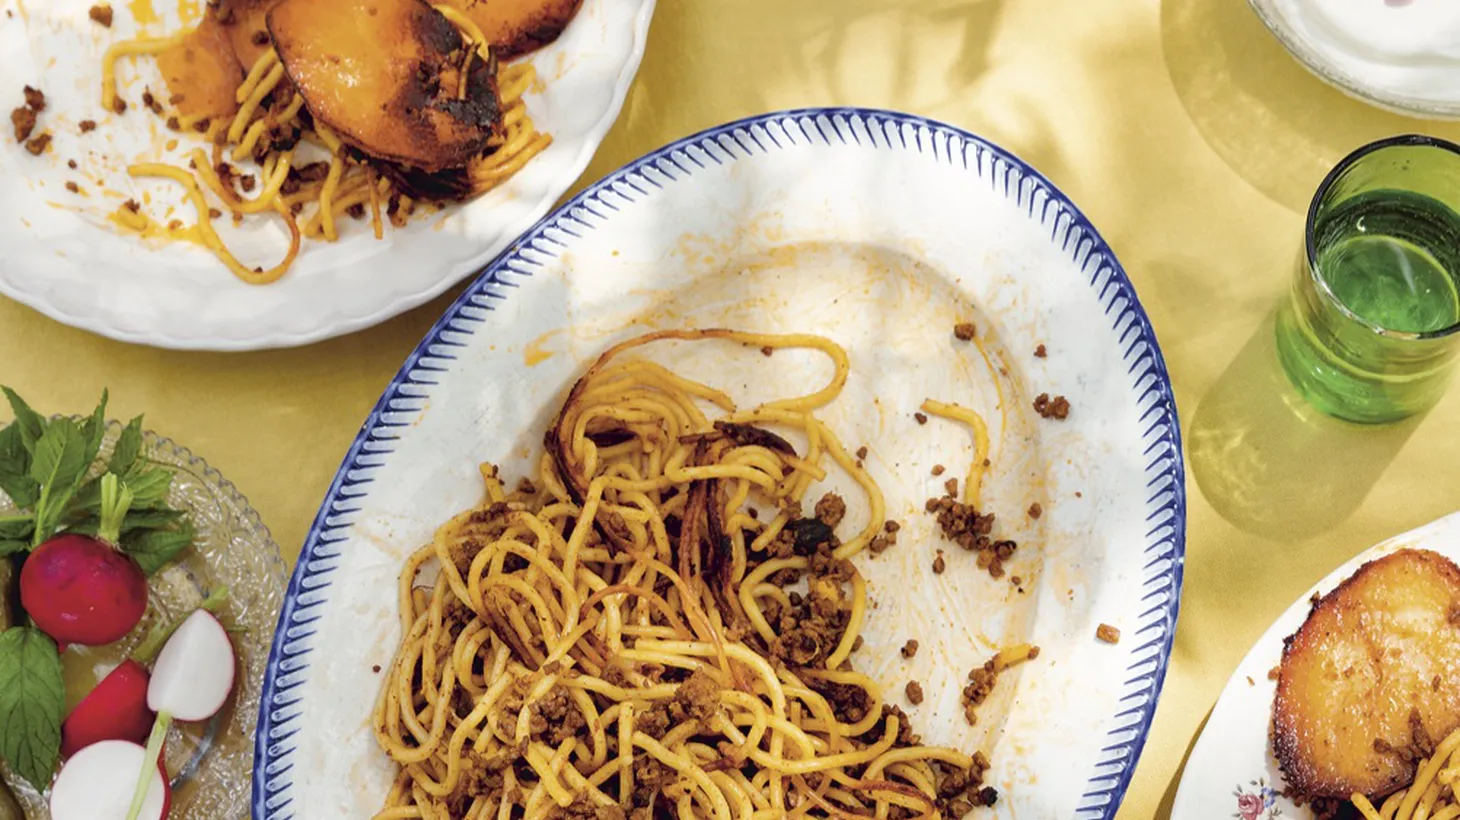 A double-cooked makaroni with turmeric and saffron inspired by spaghetti bolognese embodies the culinary traditions of both Iran and Italy.